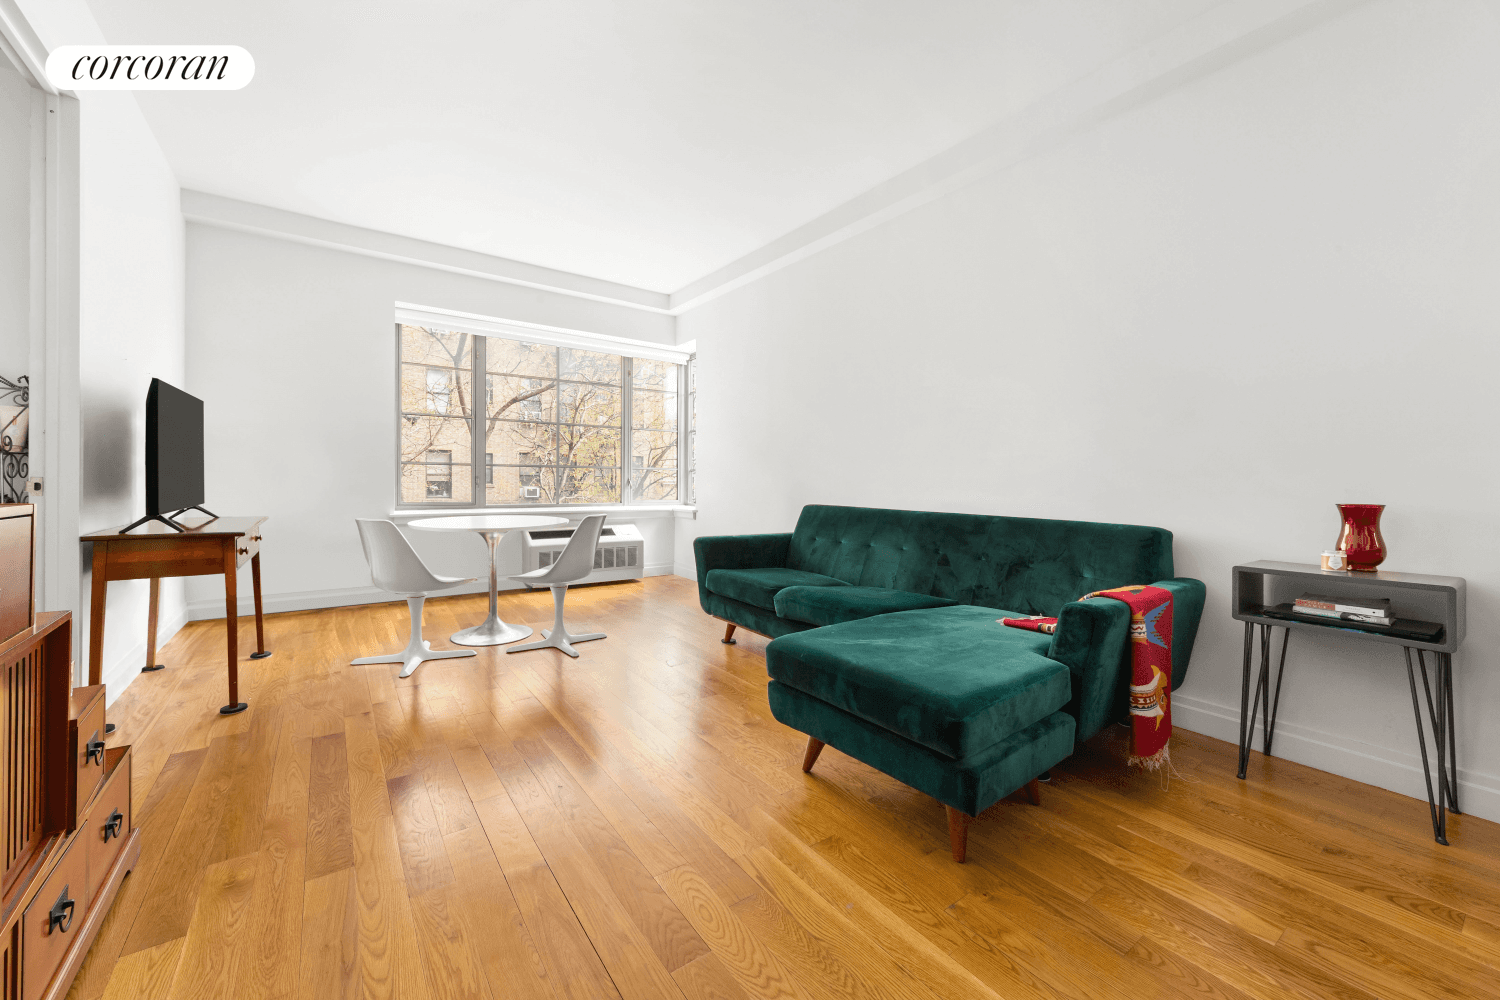 Welcome to residence 3B, a one bedroom apartment with modern features located in Harlem's boutique condo building, Uptown 58.